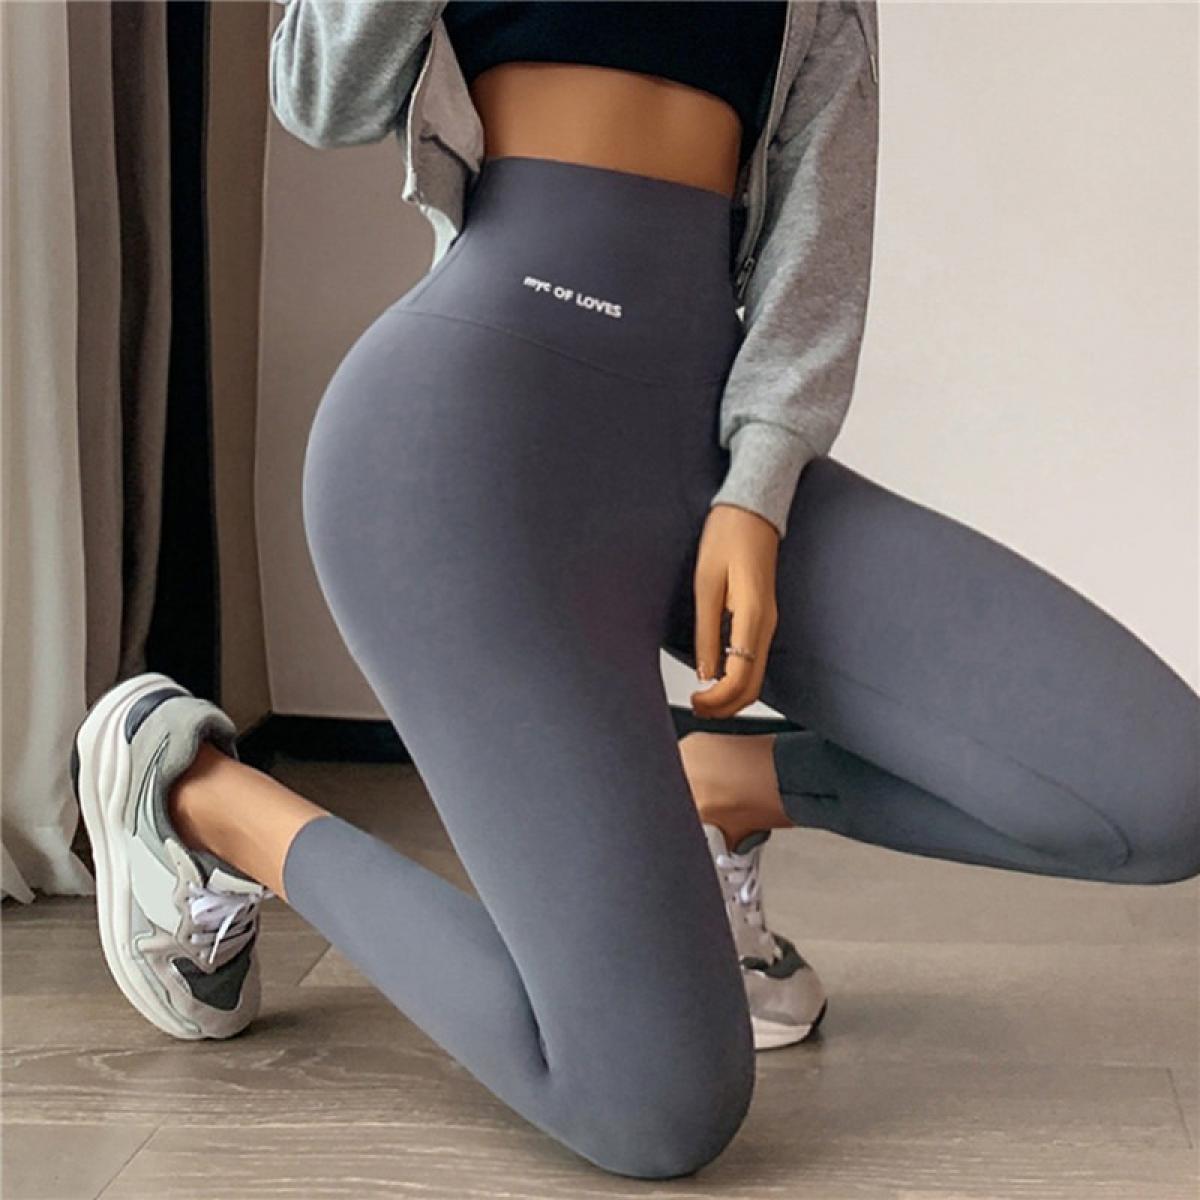 Solid Seamless Leggings With Pocket Women Soft Workout Tights Fitness  Outfits Yoga Pants High Waist Gym Wear Spandex Leg Color Black size  2XL70-80kg